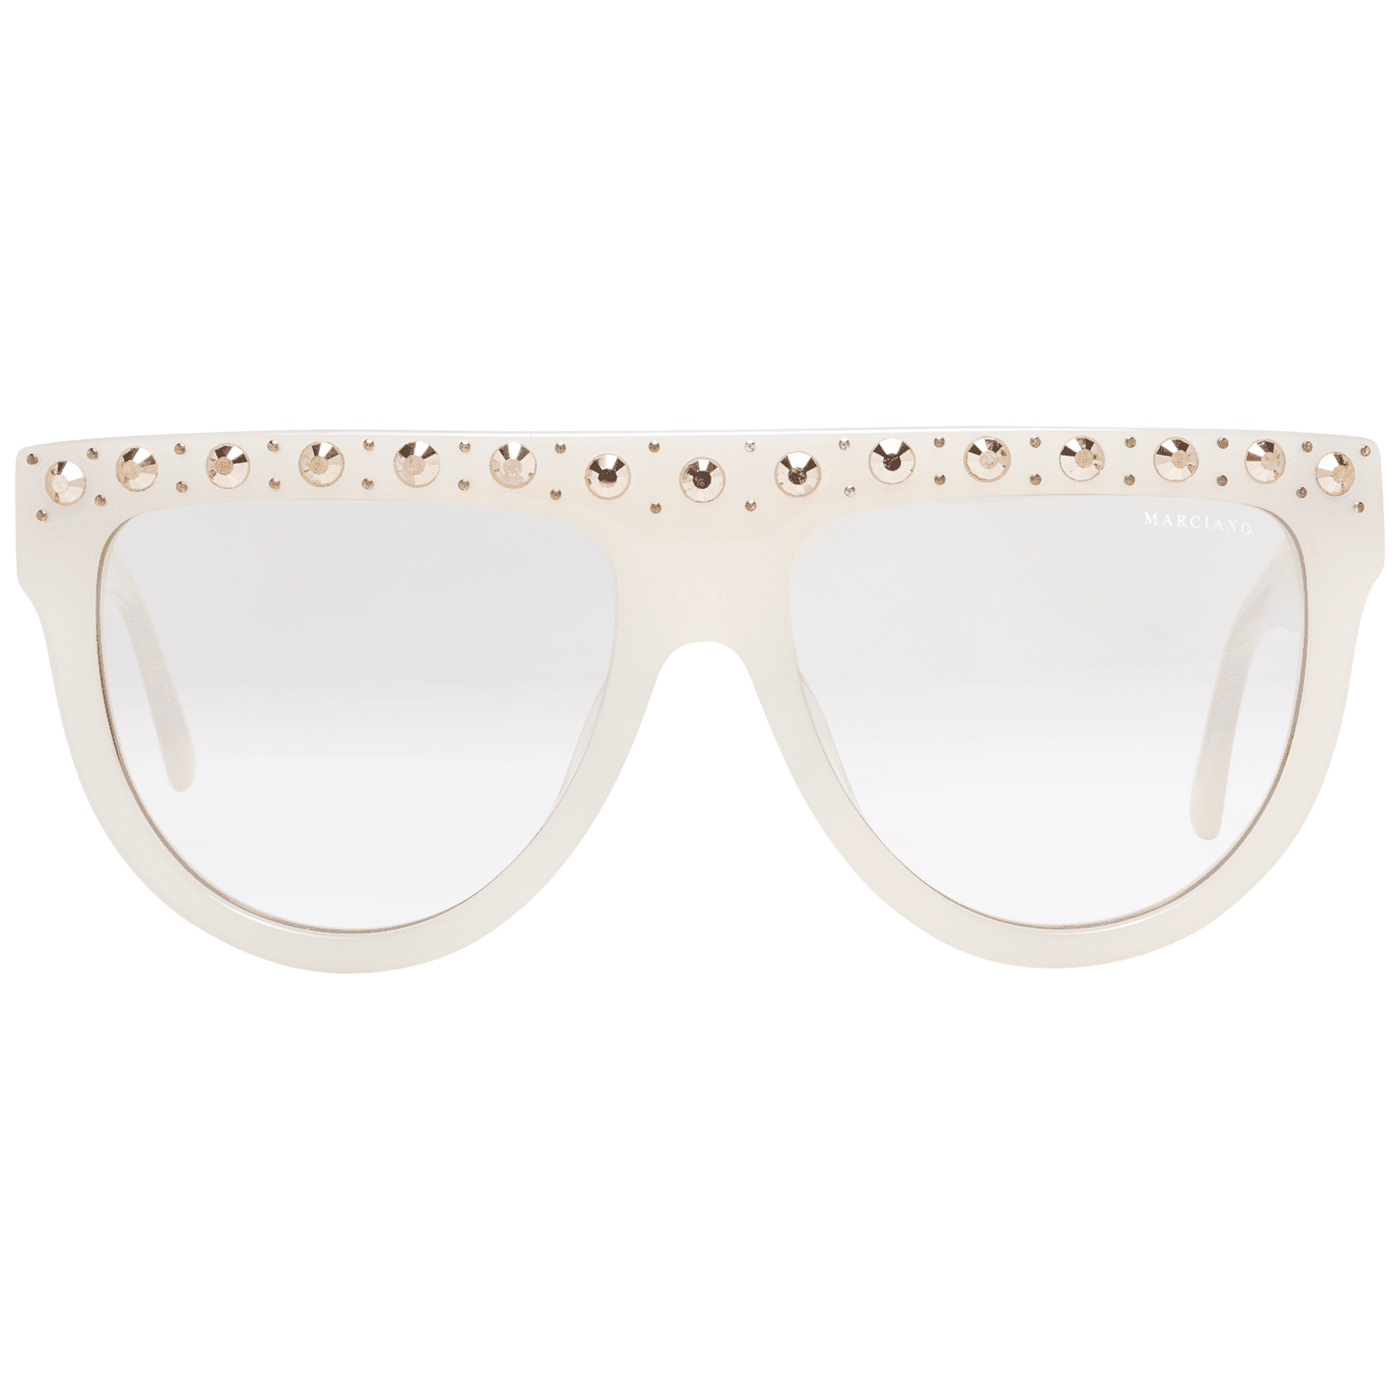 Guess By Marciano GM0795 Gradient Oval Sunglasses feed-agegroup-adult, feed-color-White, feed-gender-female, Guess By Marciano, Sunglasses for Women - Sunglasses, White at SEYMAYKA